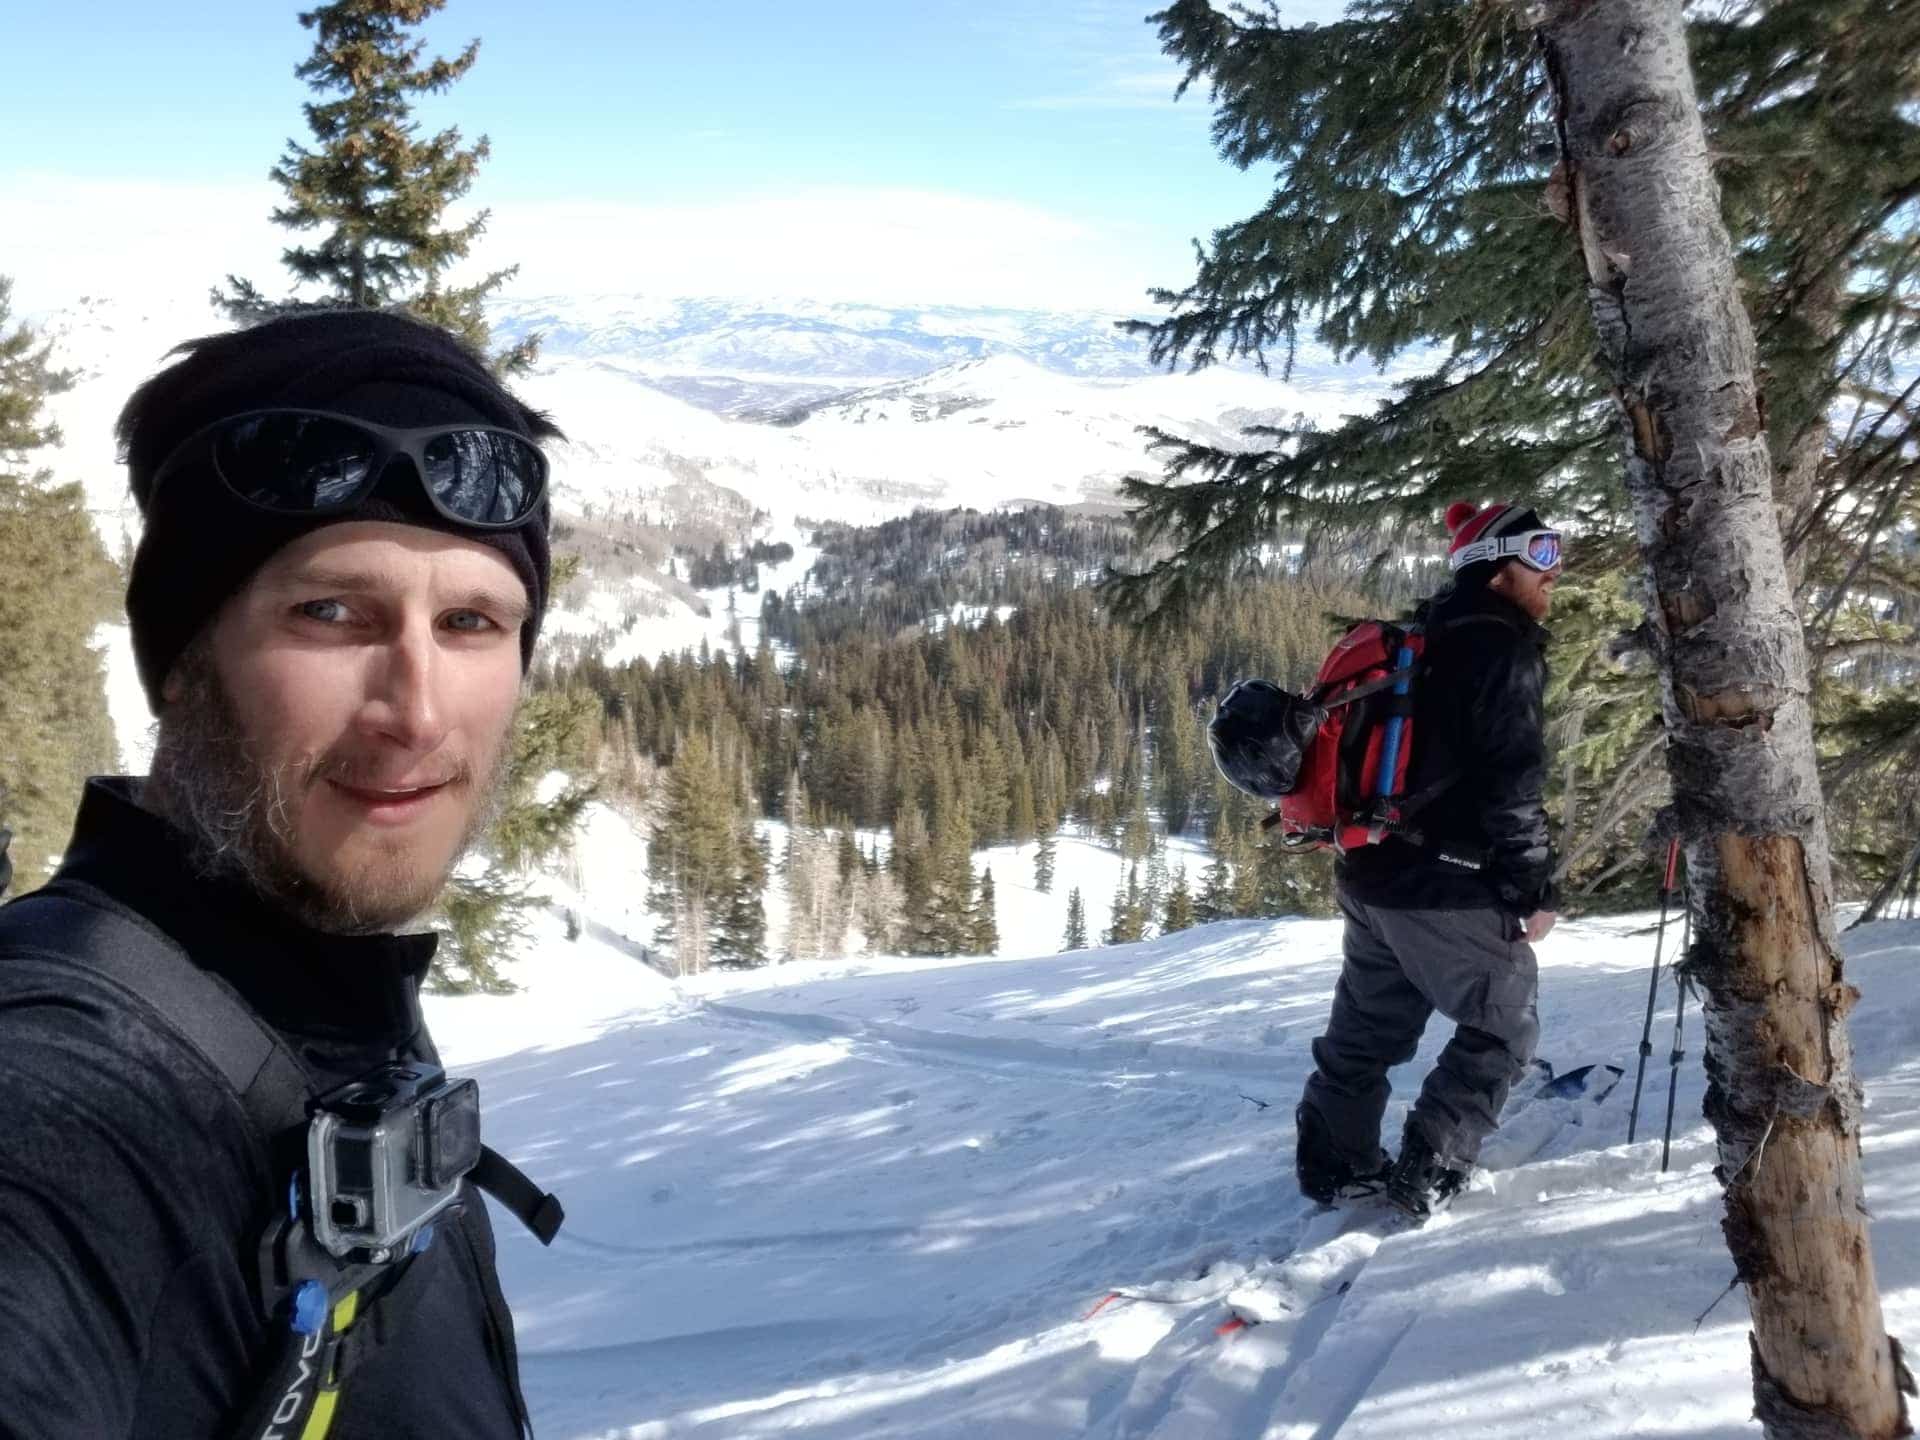 Randy and I are prepping for the ski descent